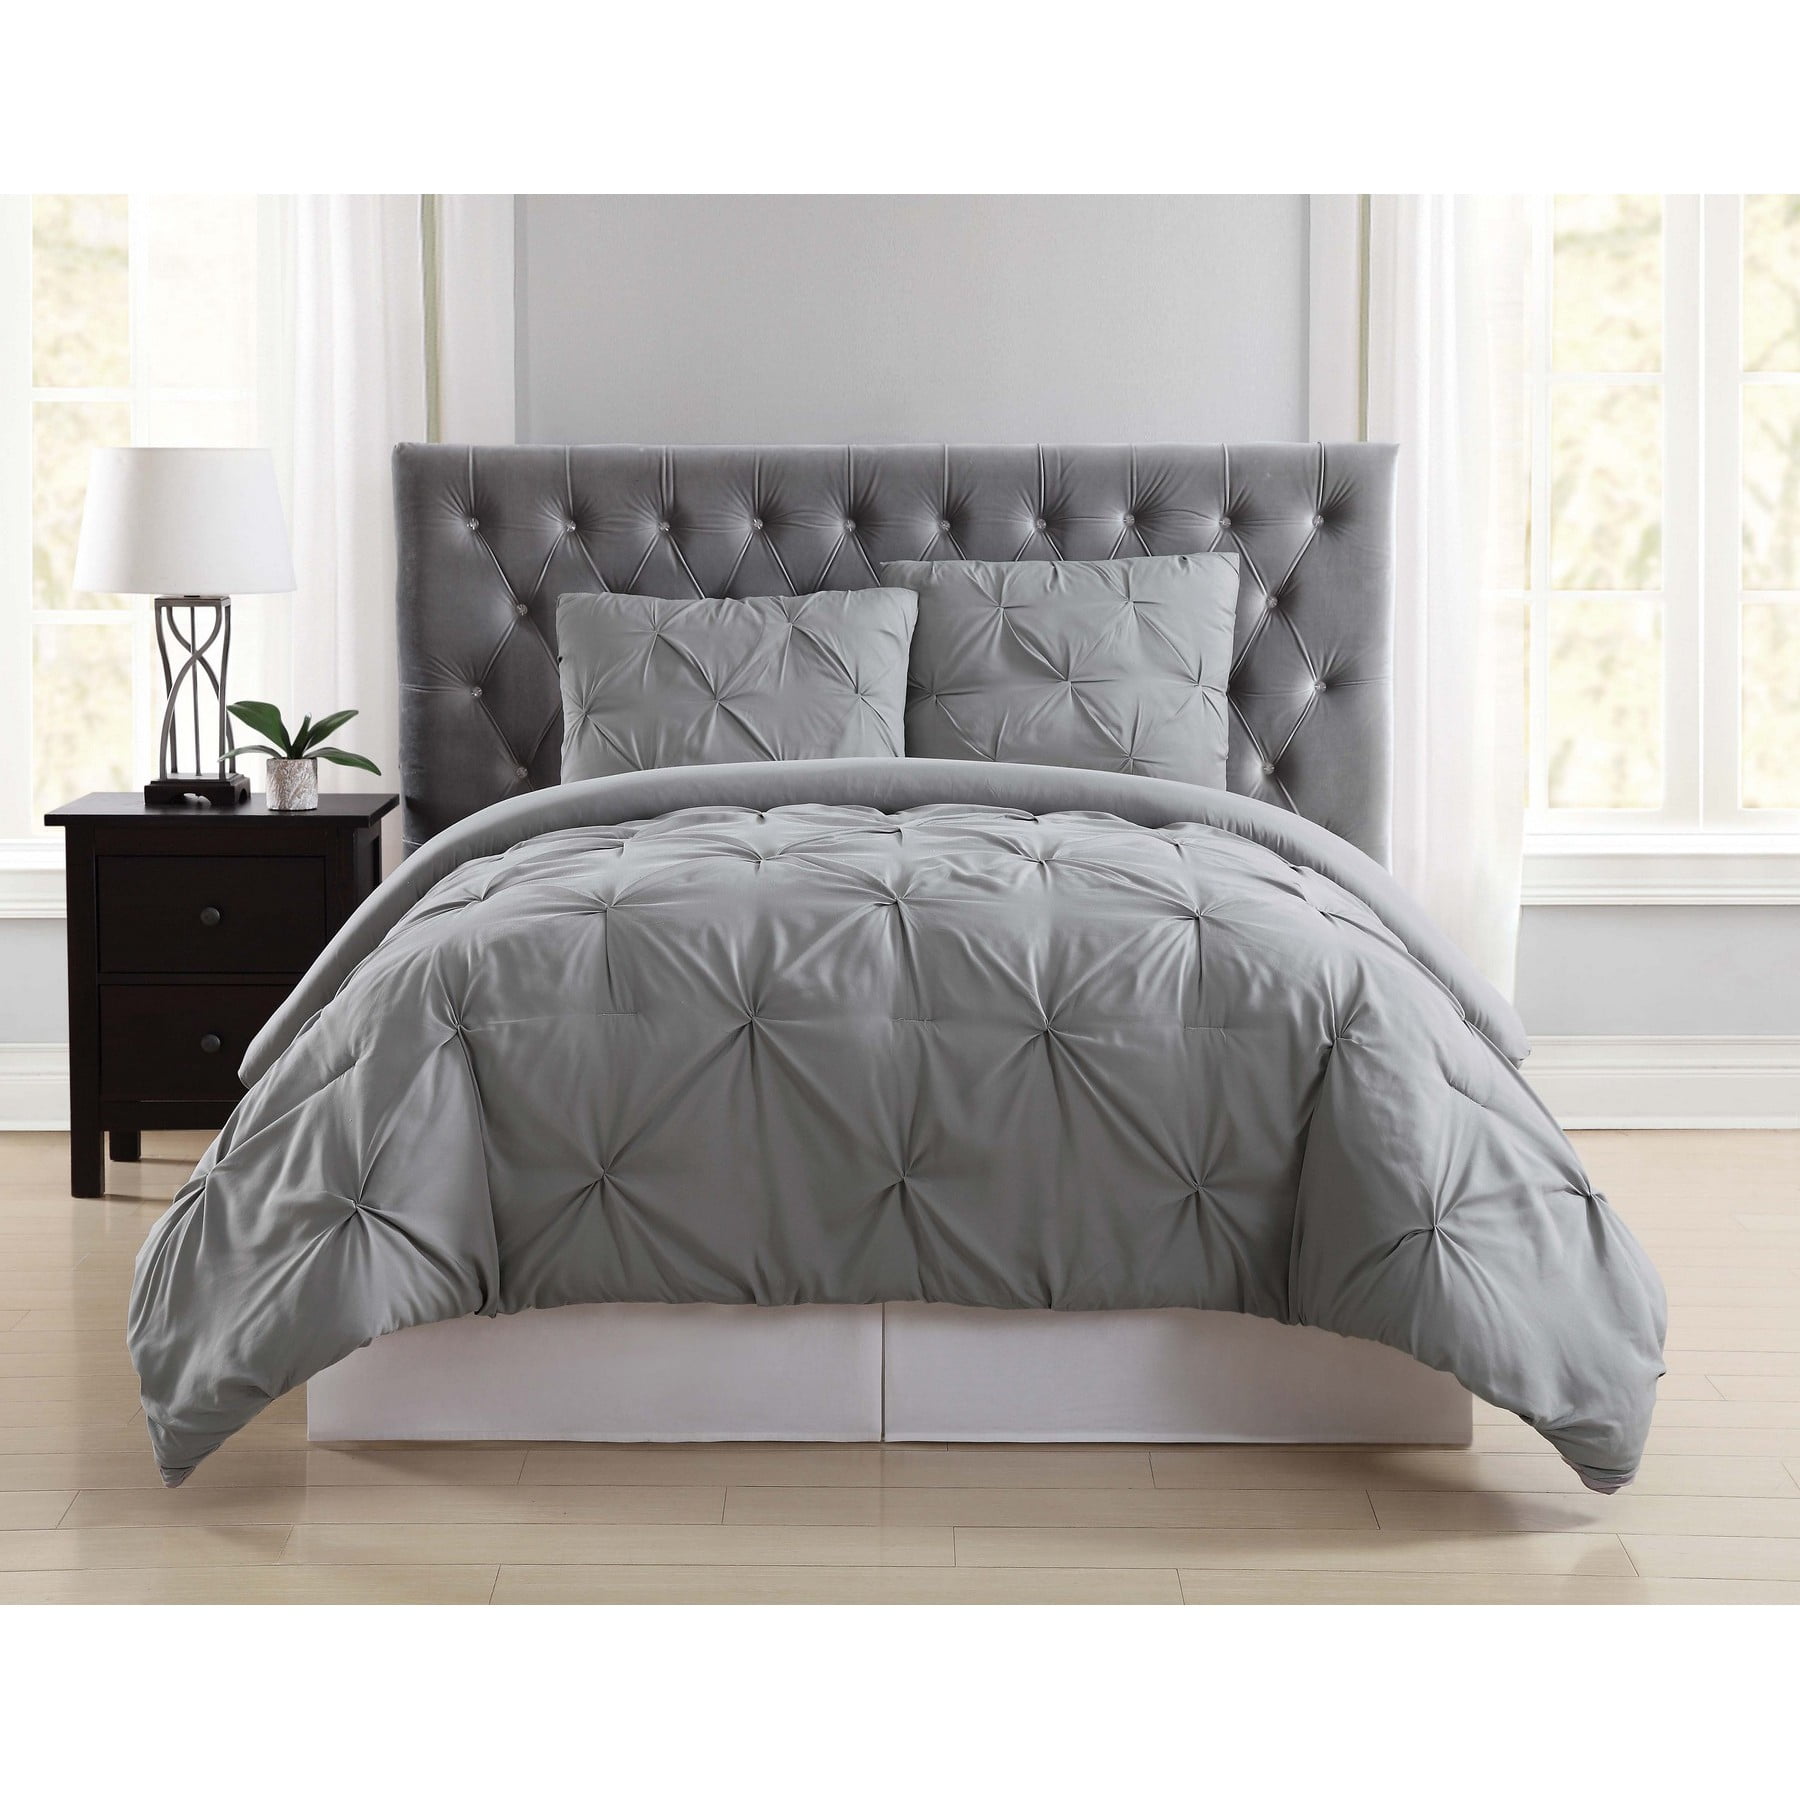 Truly Soft Everyday Pleated Duvet Set, Grey Pleated Duvet Cover